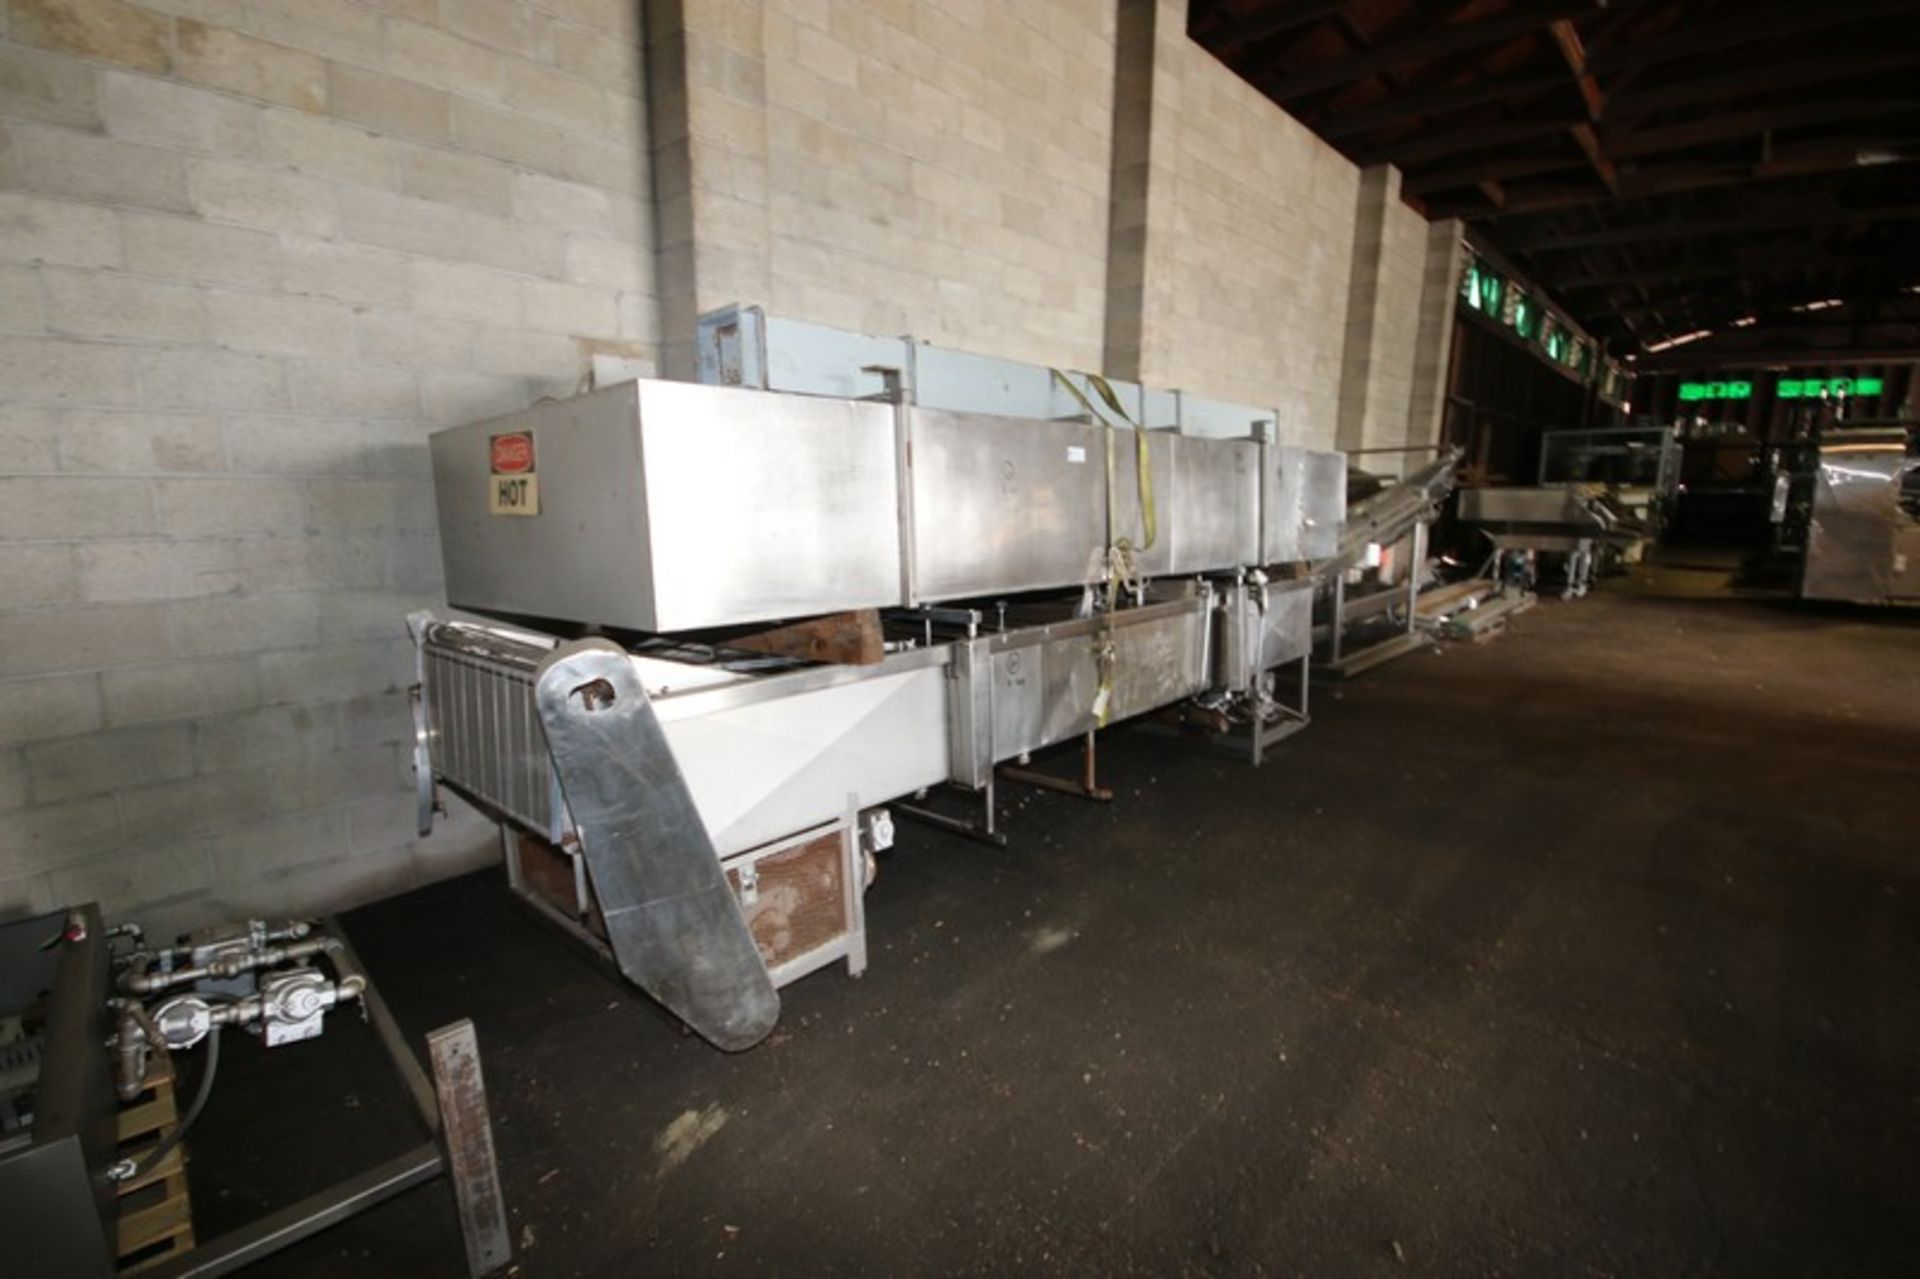 Higgs S/S Conveyor Bakery Fryer, Natural Gas Heated, 14' L x 54"W, Includes Exhaust Hood & Control